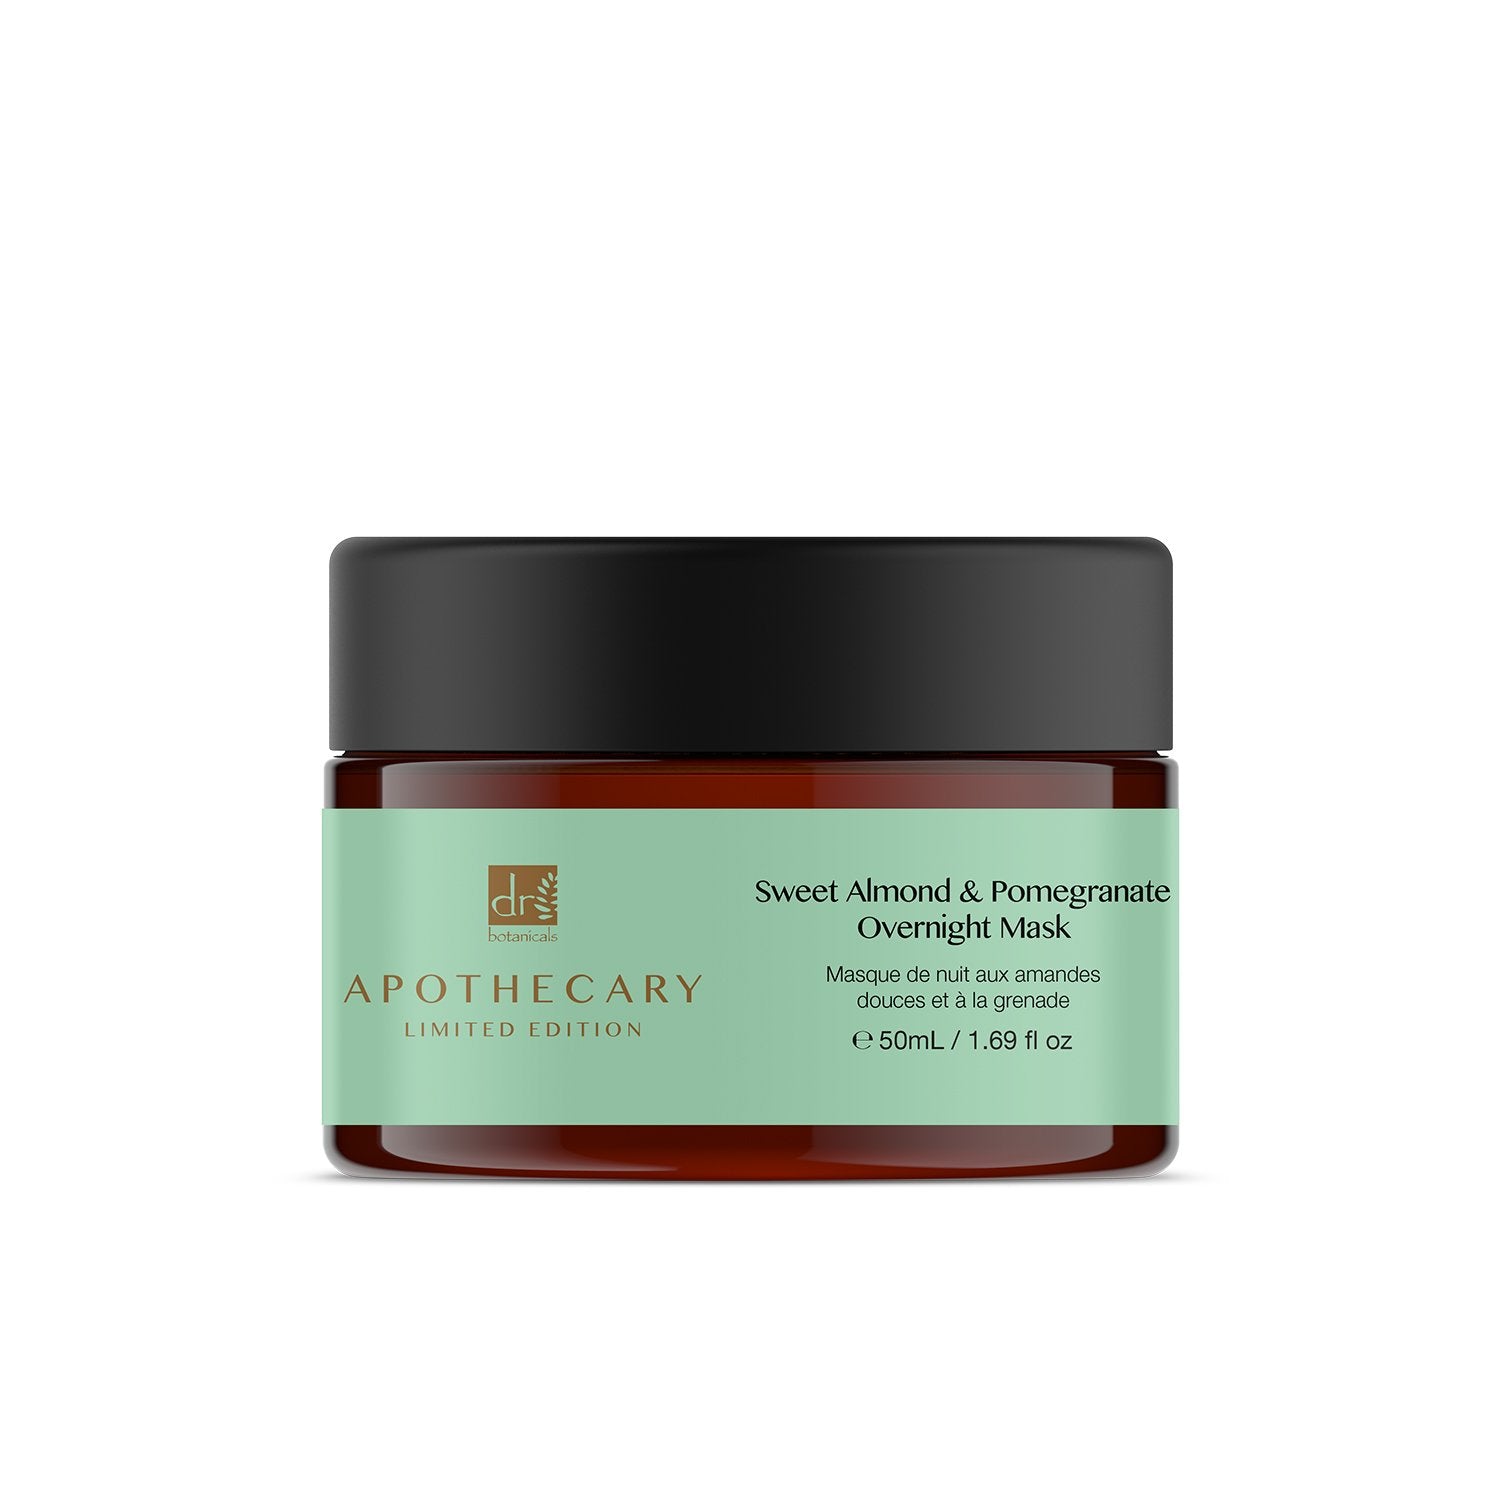 Sweet Almond and Pomegranate Overnight Mask - limited edition